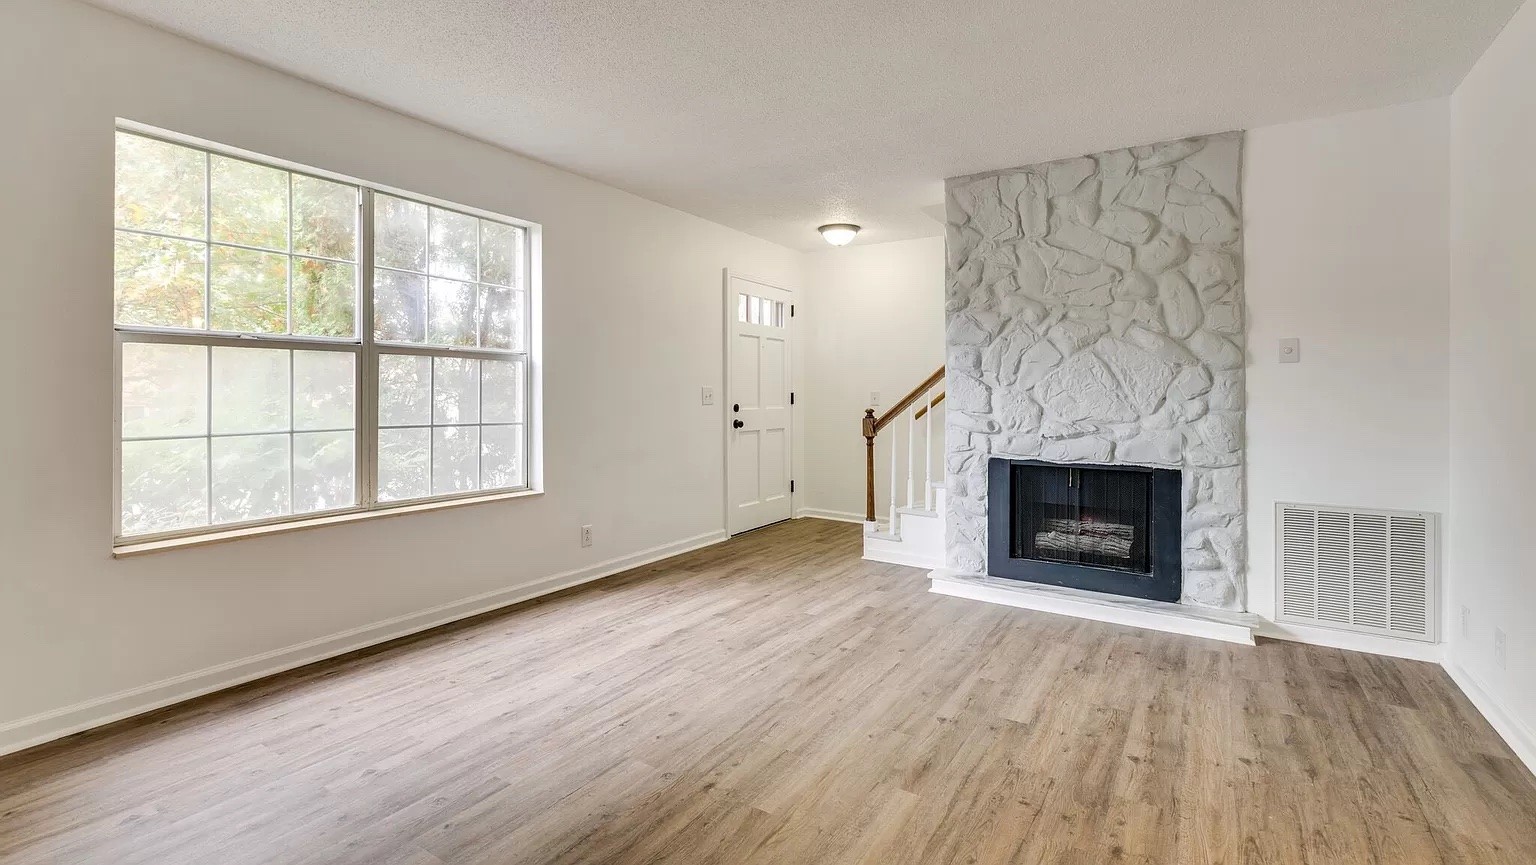 an empty room with windows a fireplace and wooden floor